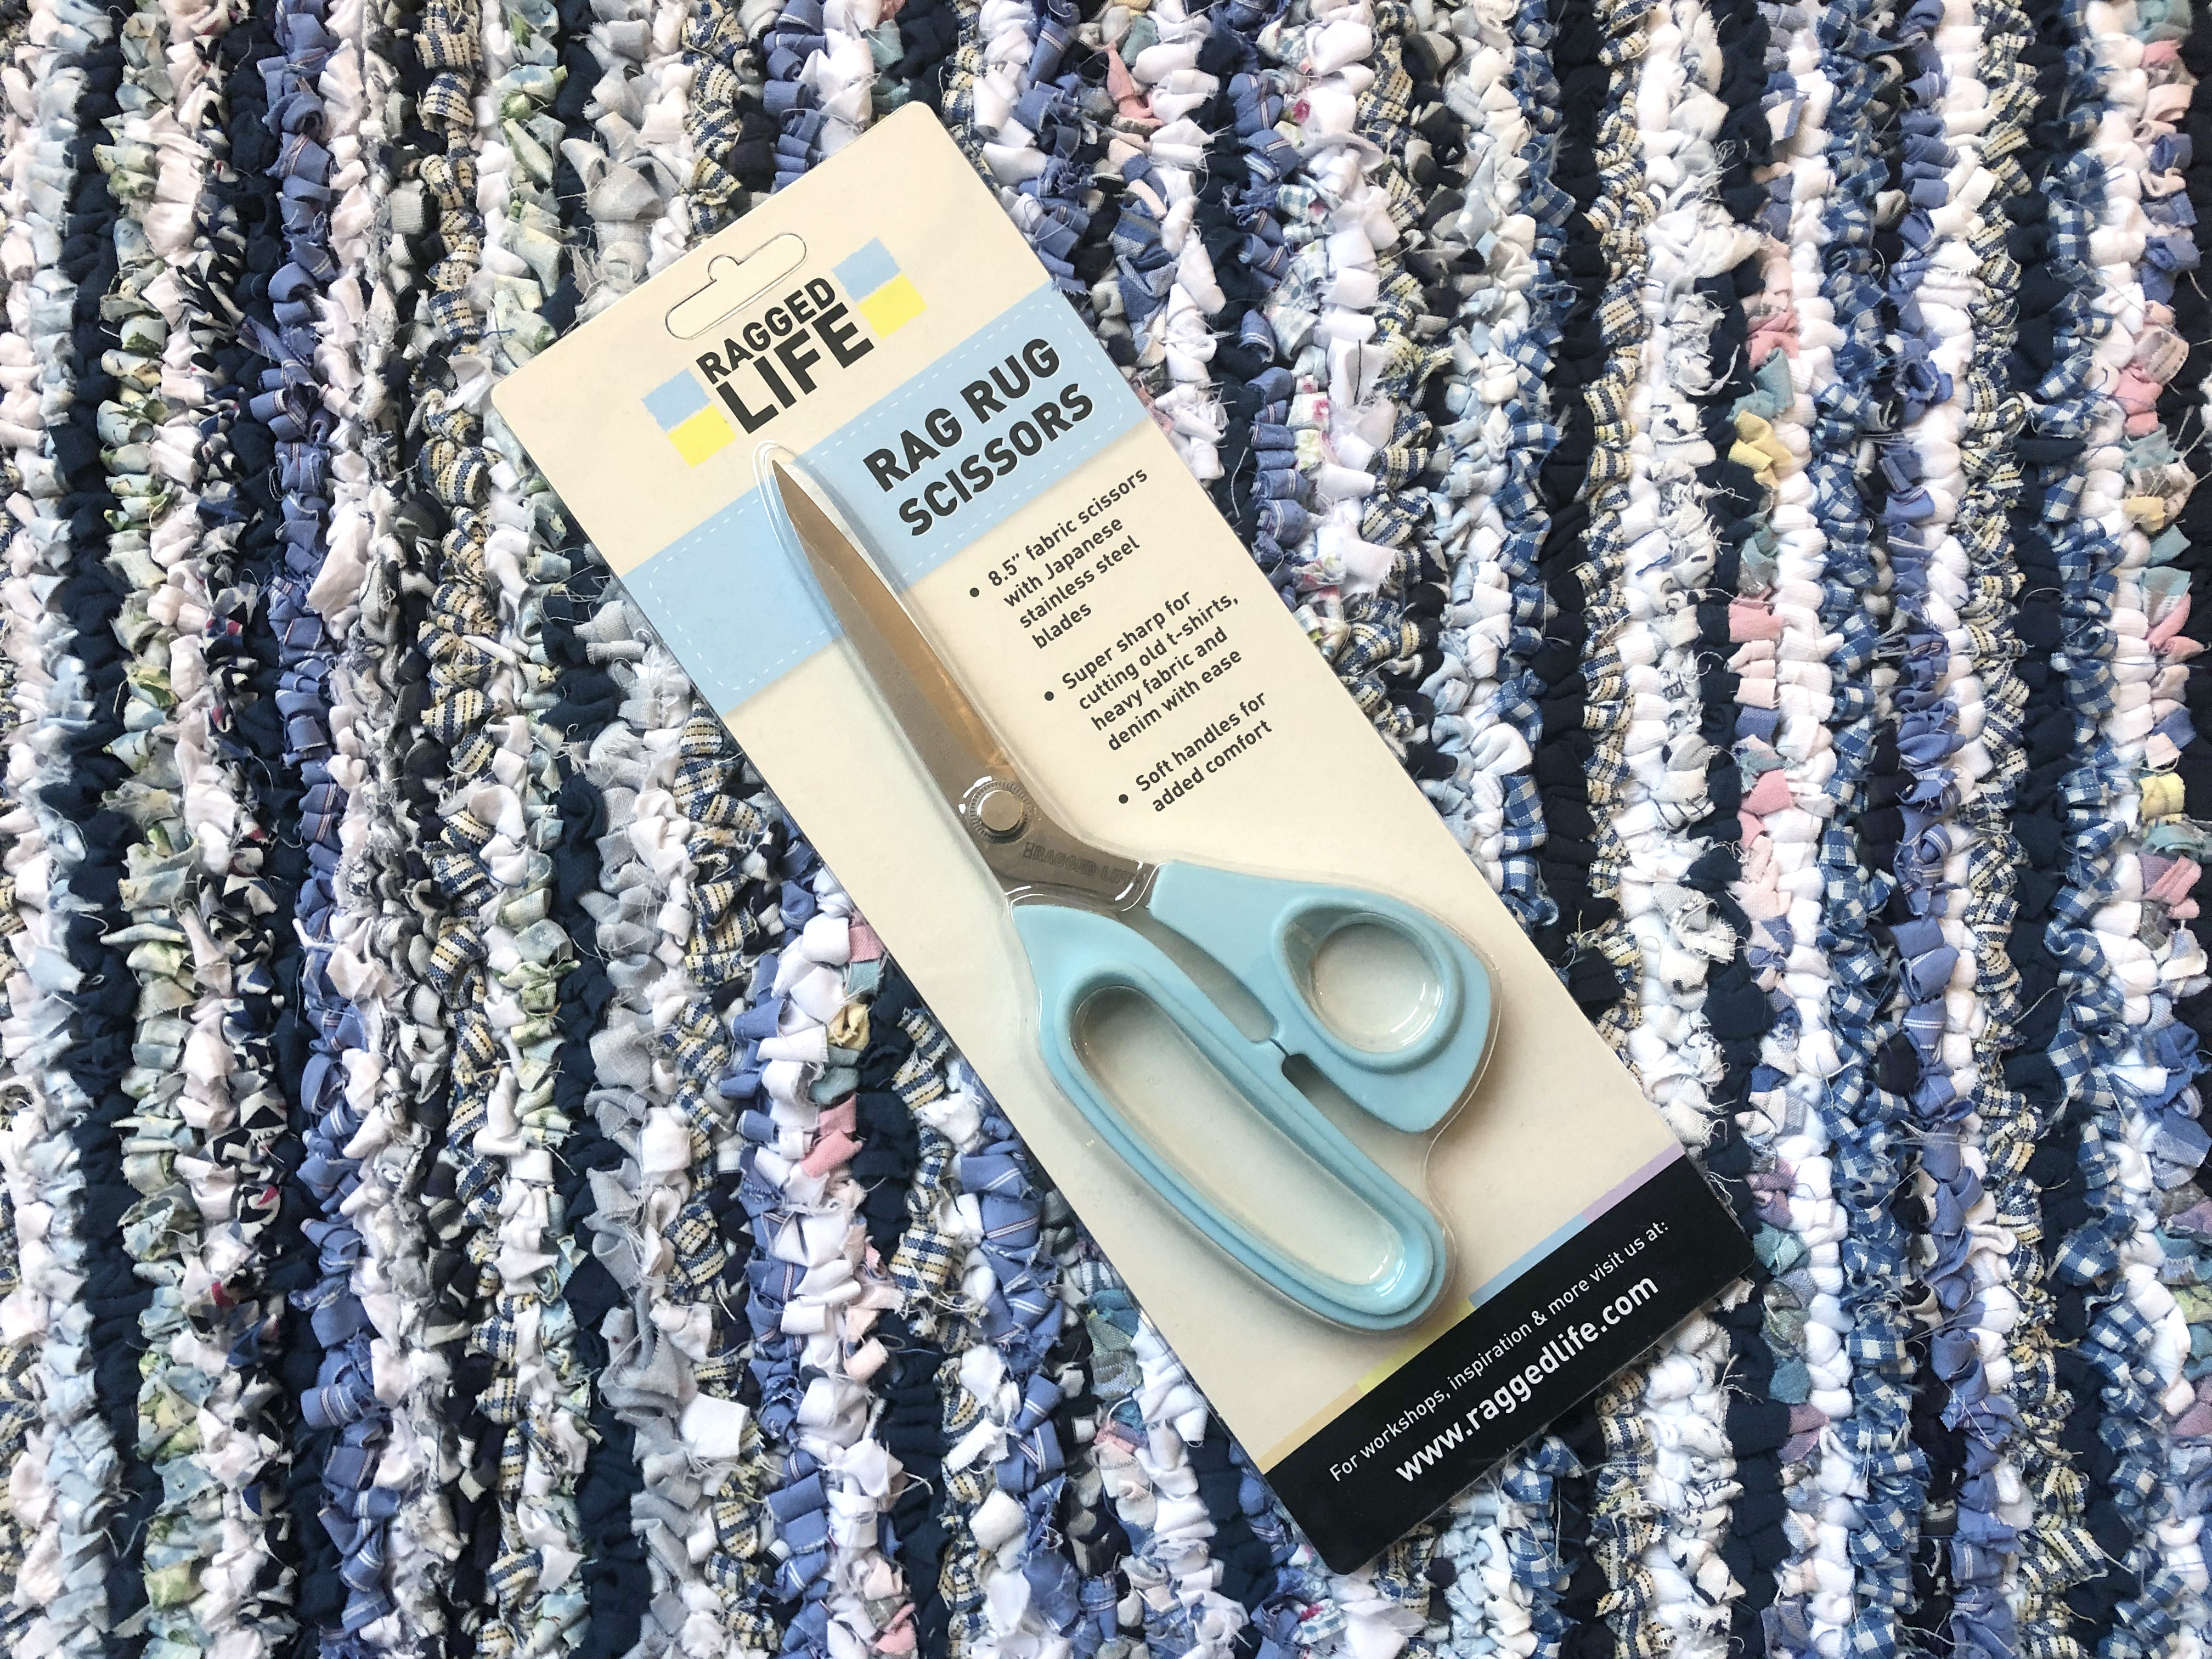 Rug Making Scissors in their Packaging by Ragged Life